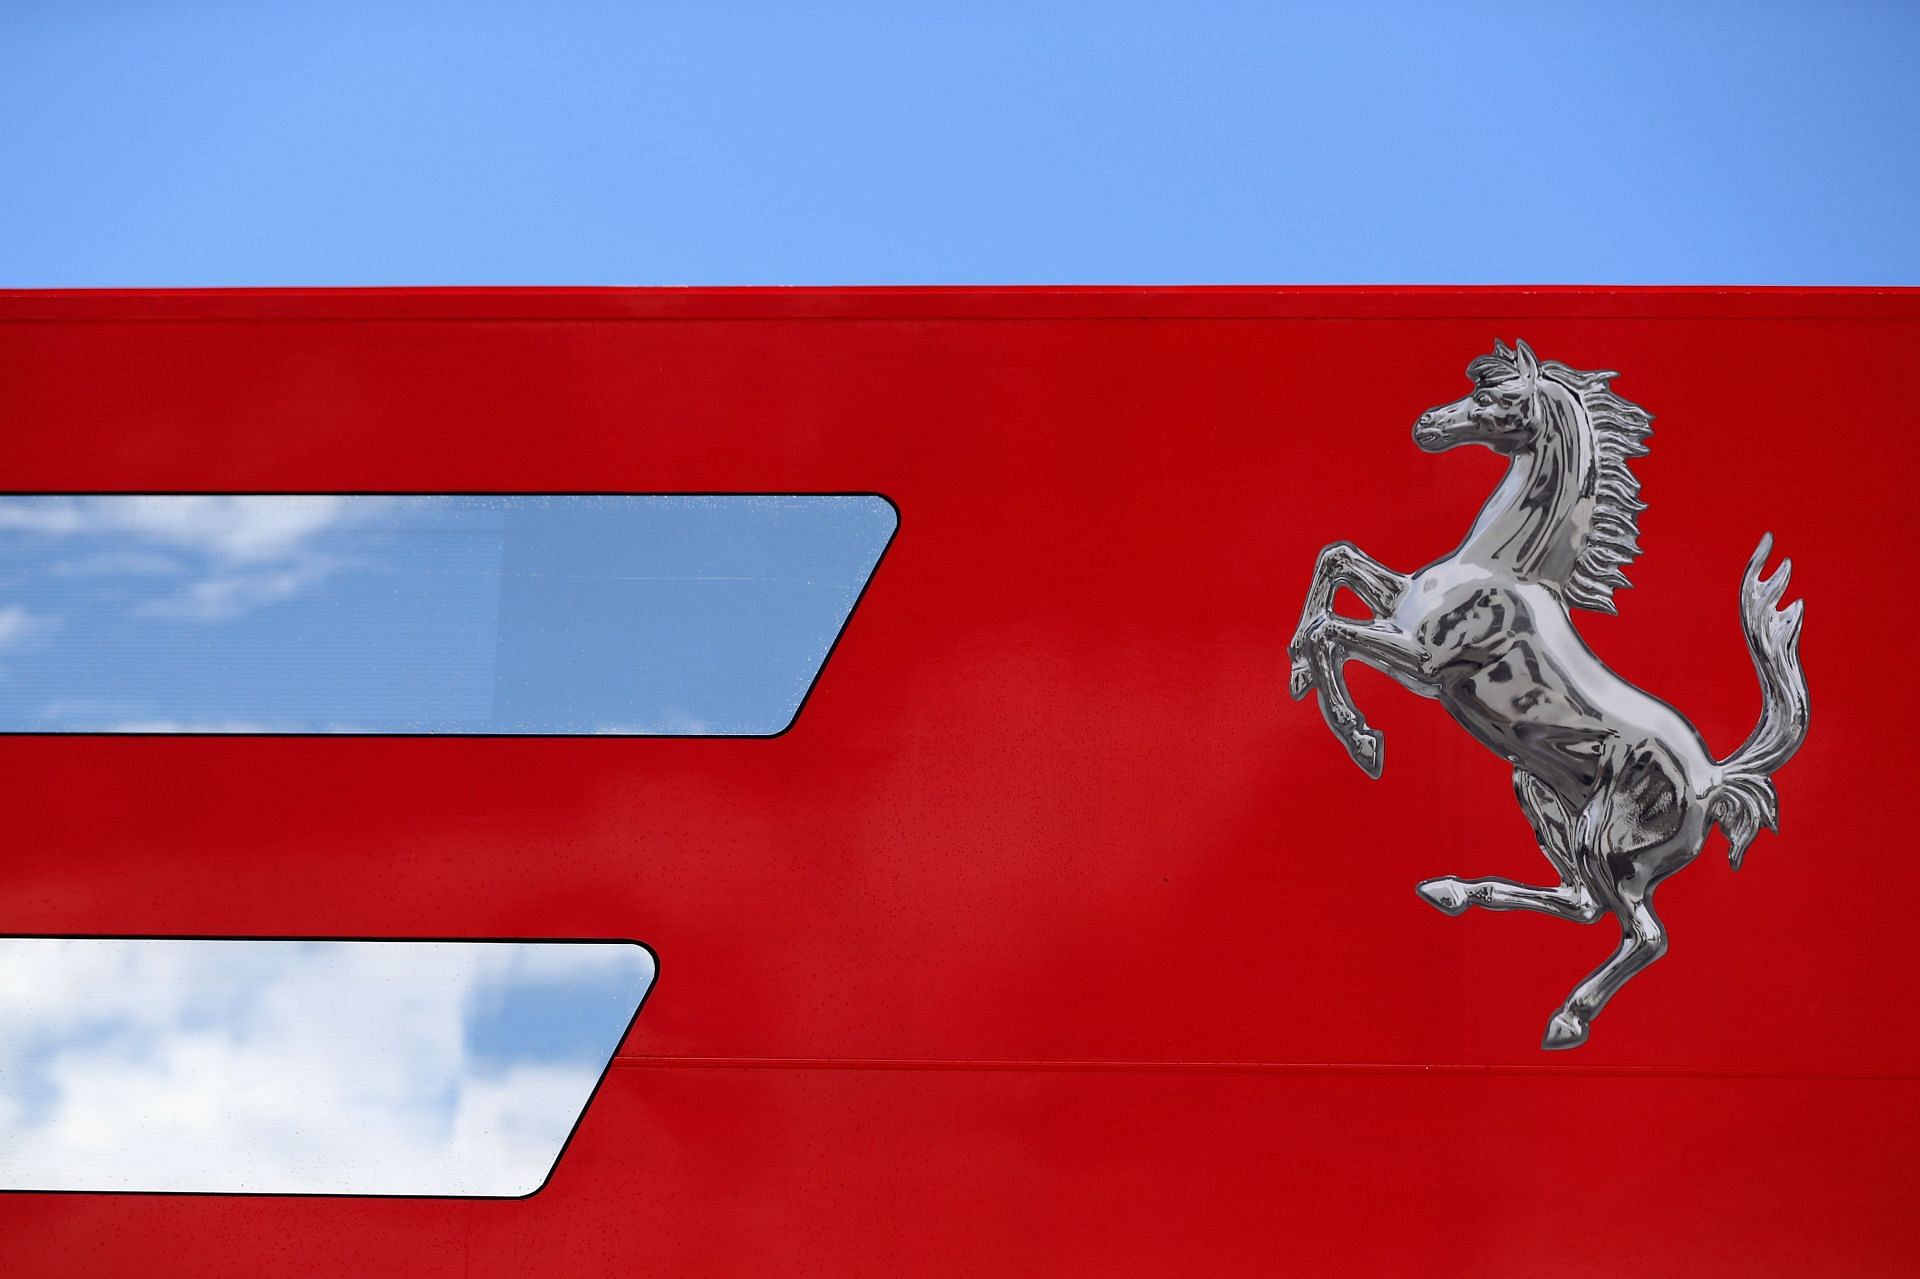 Still of Ferrari&#039;s fabled &#039;Prancing Horse&#039; logo (Photo by Mark Thompson/Getty Images)